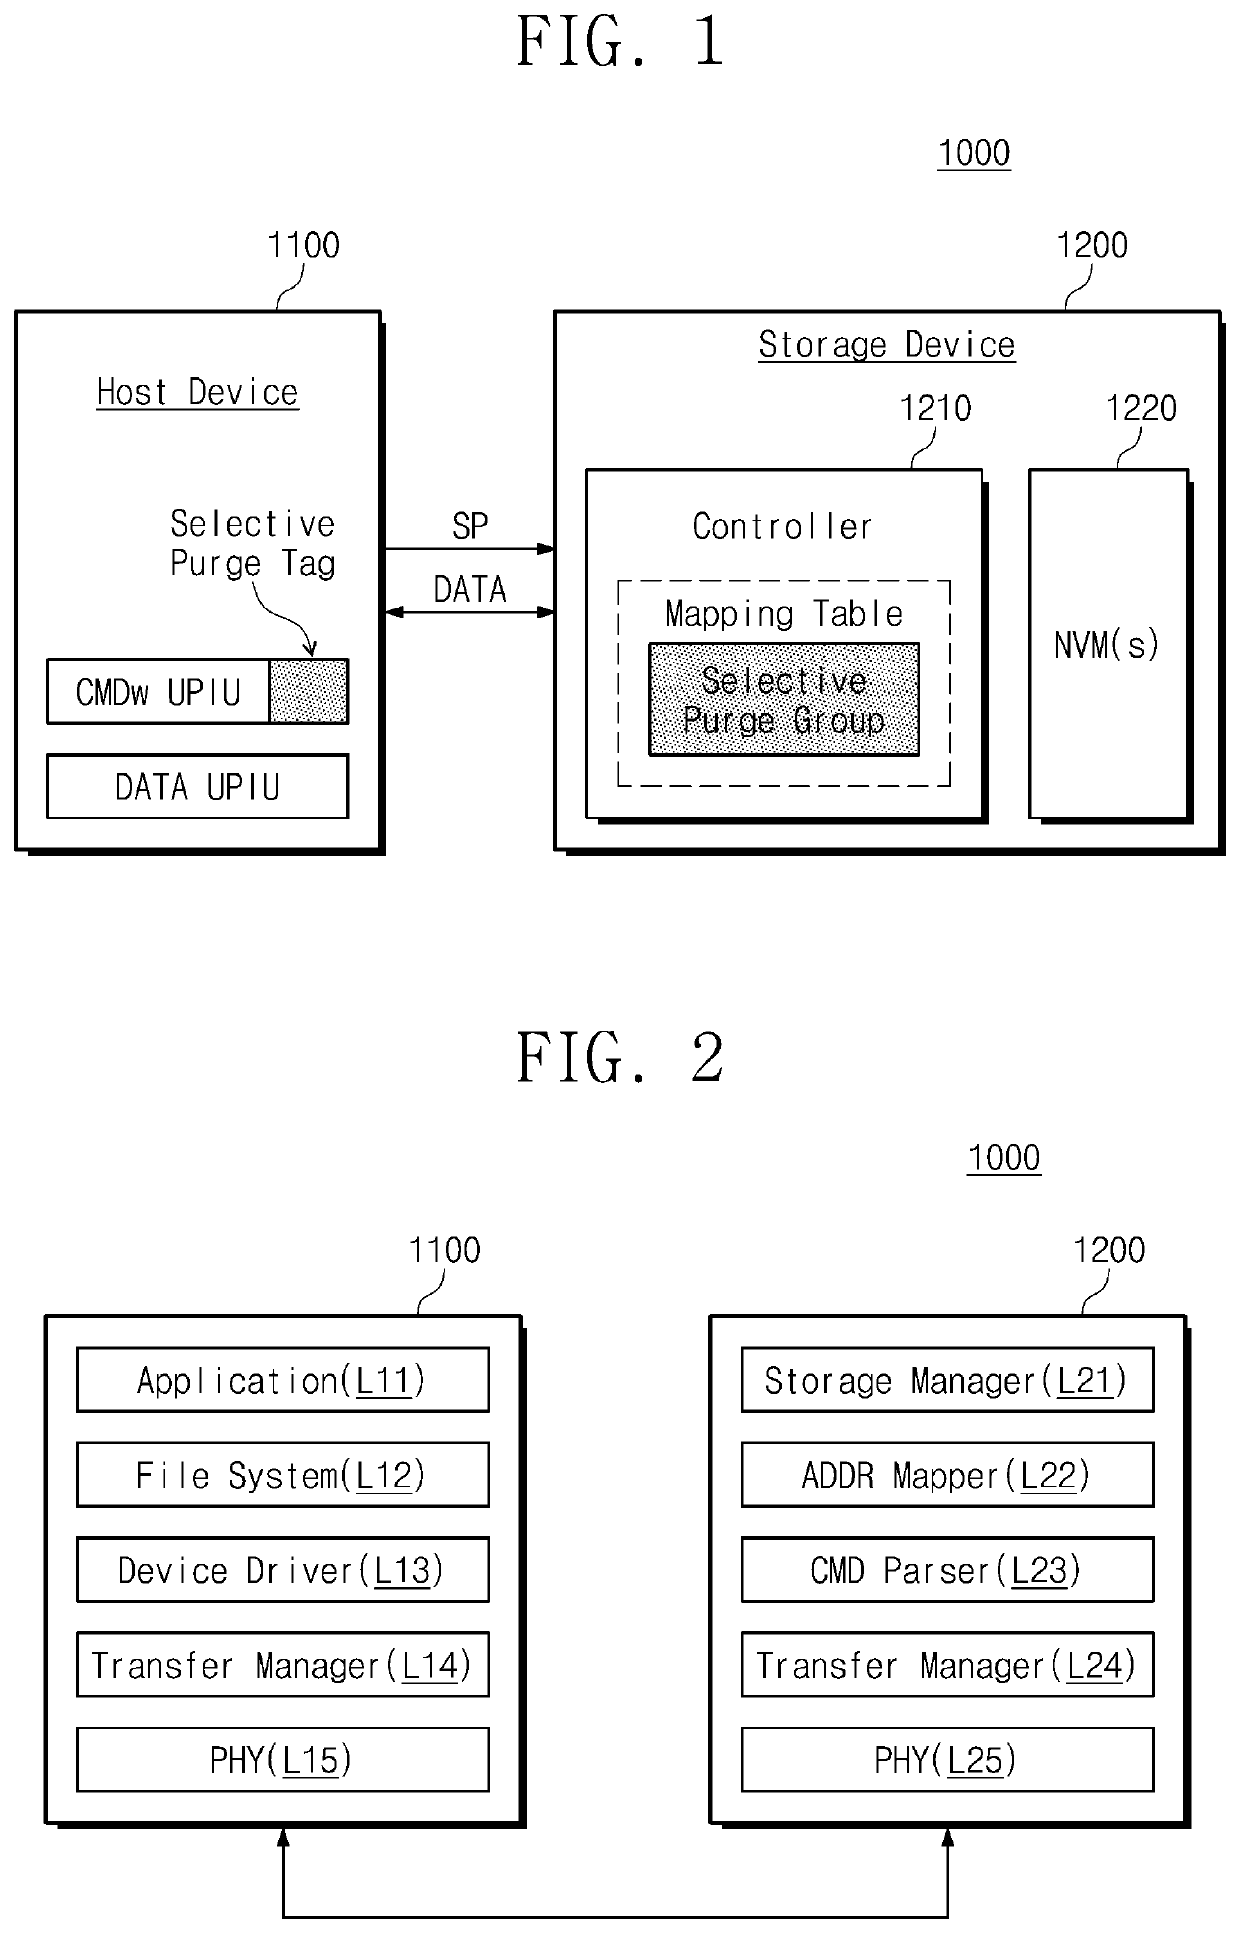 Storage system including host device and storage device configured to perform selective purge operation